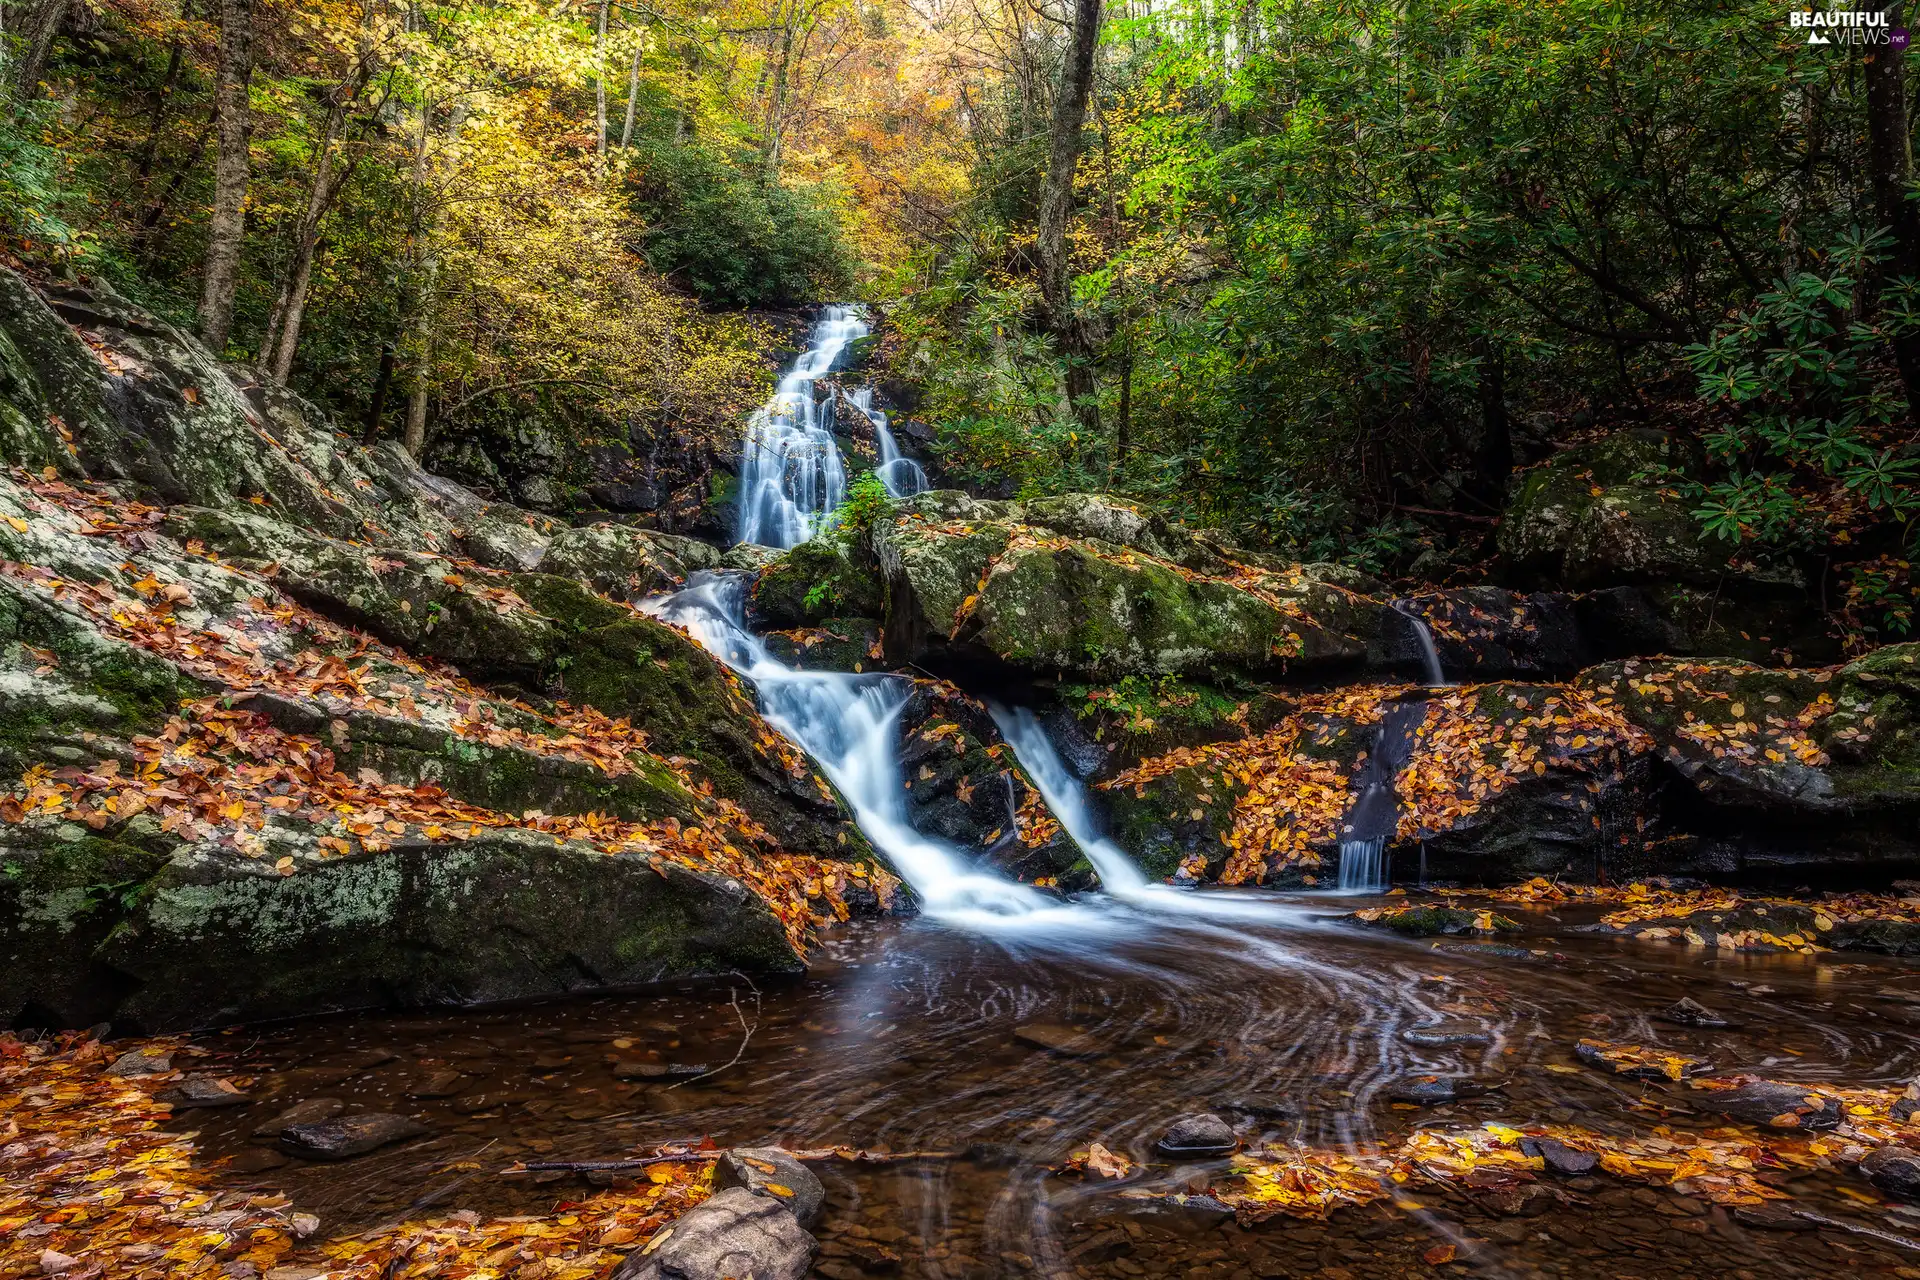 waterfall, River, rocks, small, forest, autumn, Leaf